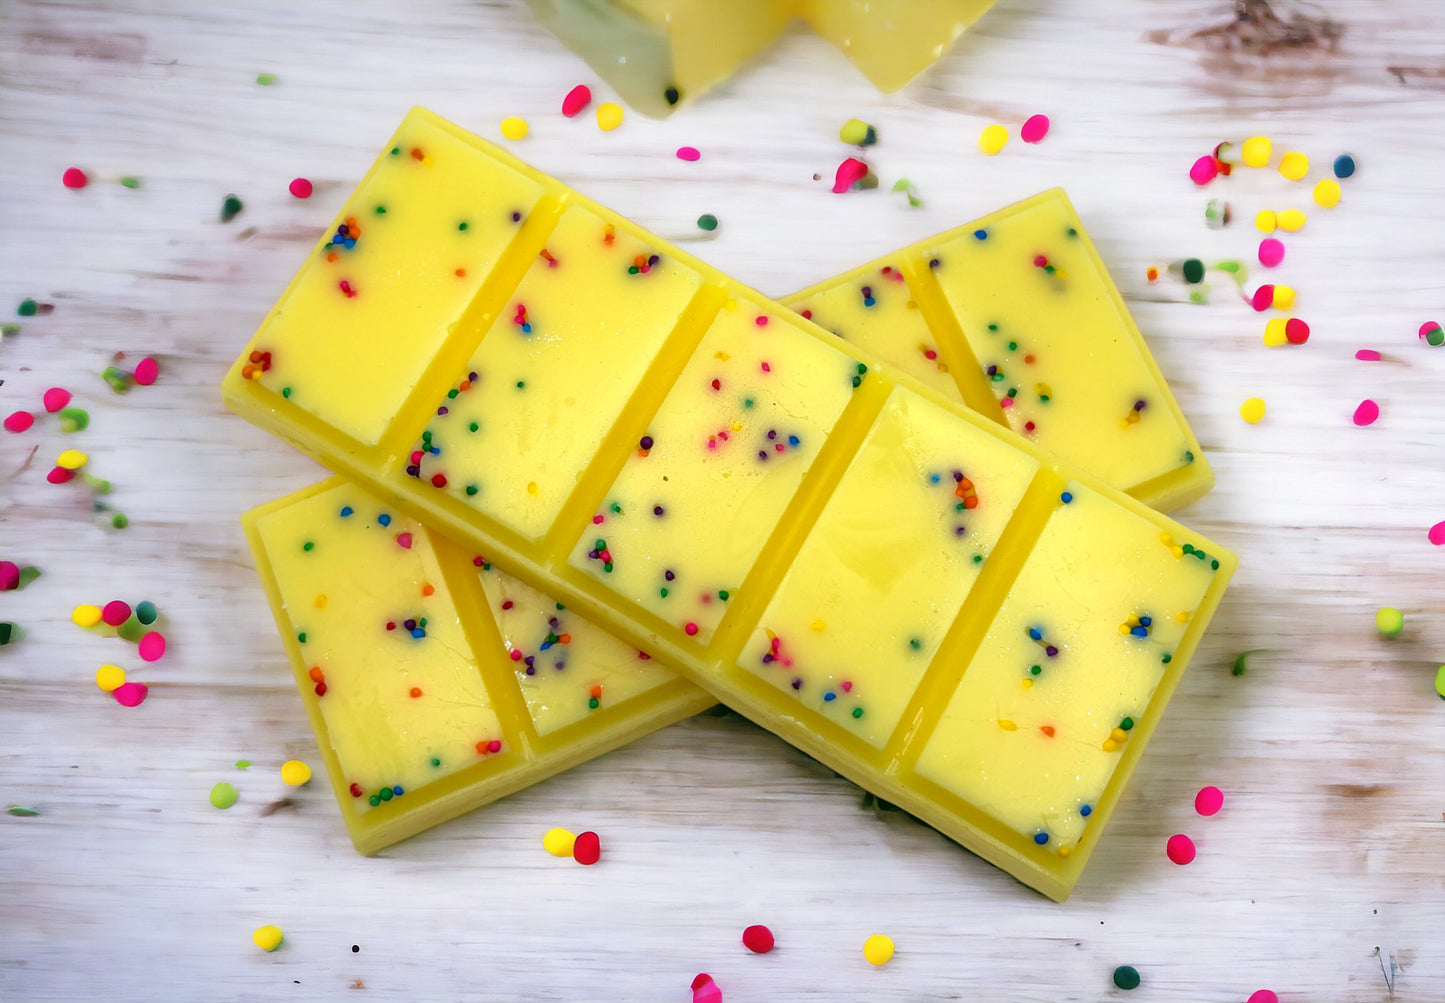 Iced Lemon Cookie Wax Melts Snap Bar. 1.75 oz. Soy Wax Melts/Strongly Scented Wax Melts. 1 Bar